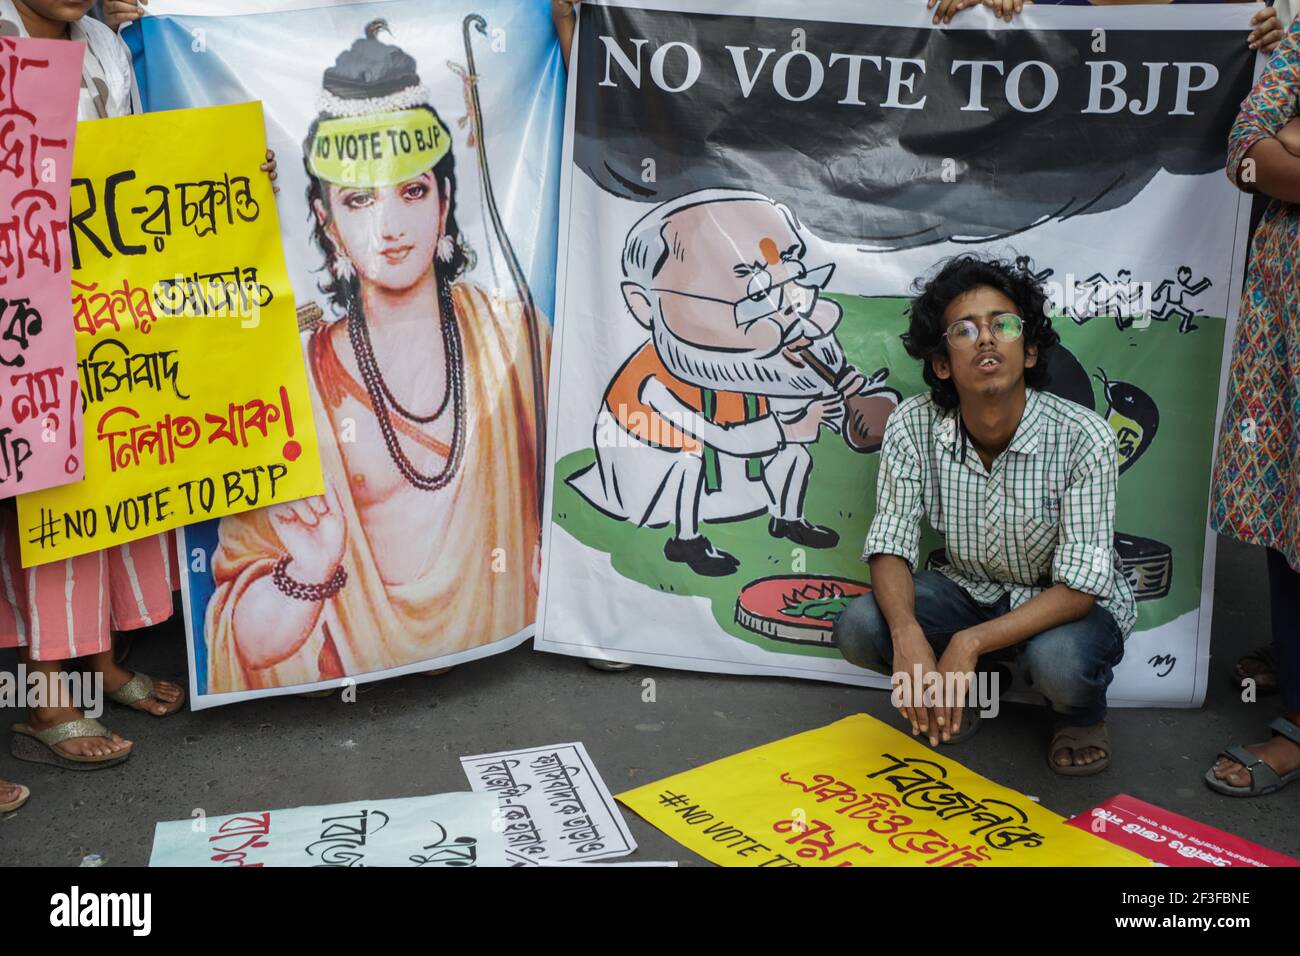 A student activist sits in front of a banner printed with image of lord Rama and 'No Vote to BJP (Bhartiya janta Party)' during a demonstration staged by students in protest against BJP (Bhartiya Janta Party) and to promote 'No Vote to BJP' movement prior to West Bengal assembly elections. Stock Photo